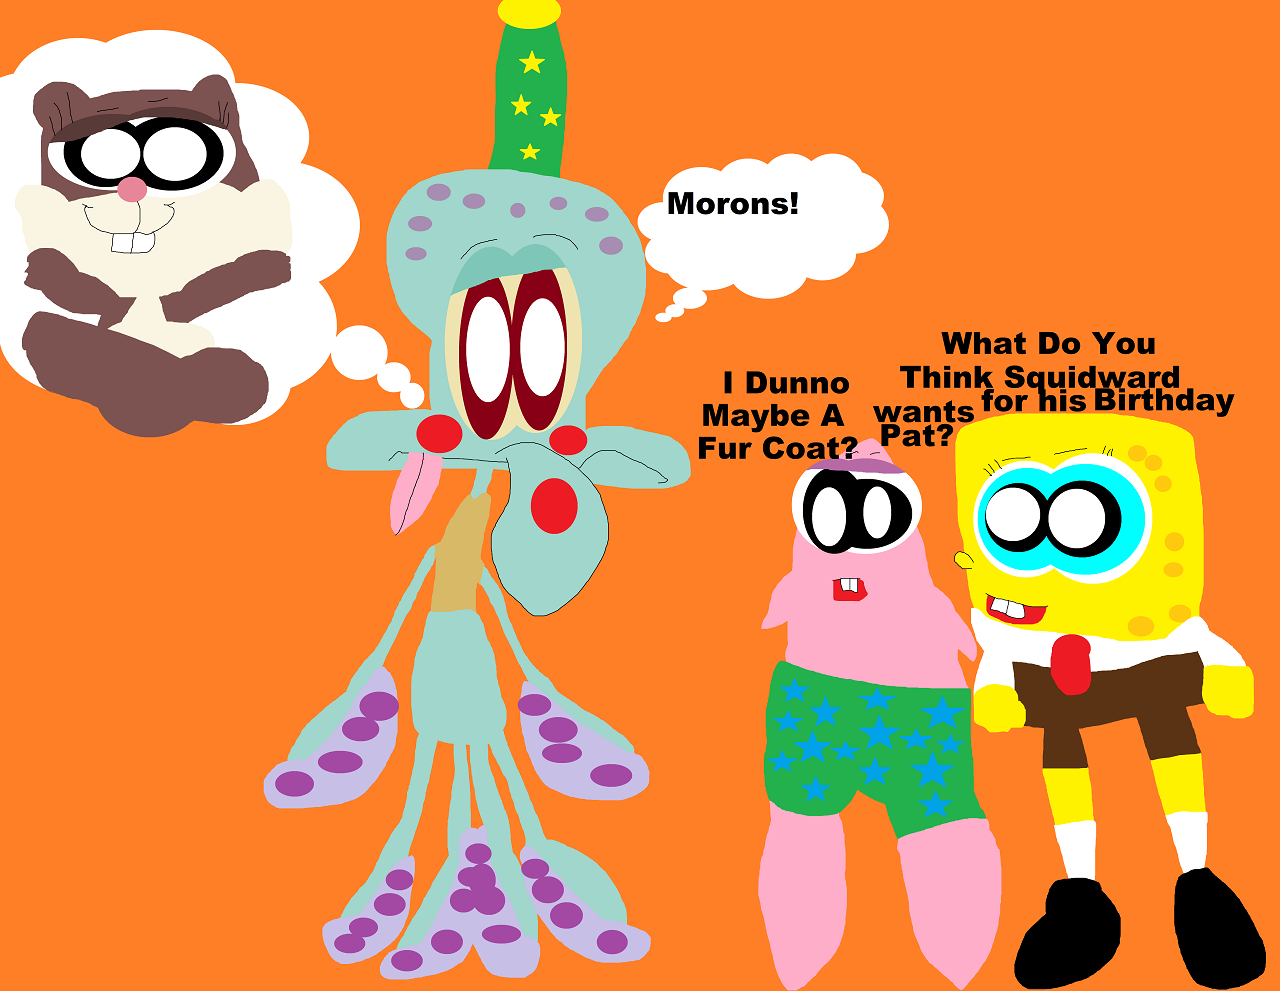 What do You Think Squidward Wants For His Birthday by Falconlobo